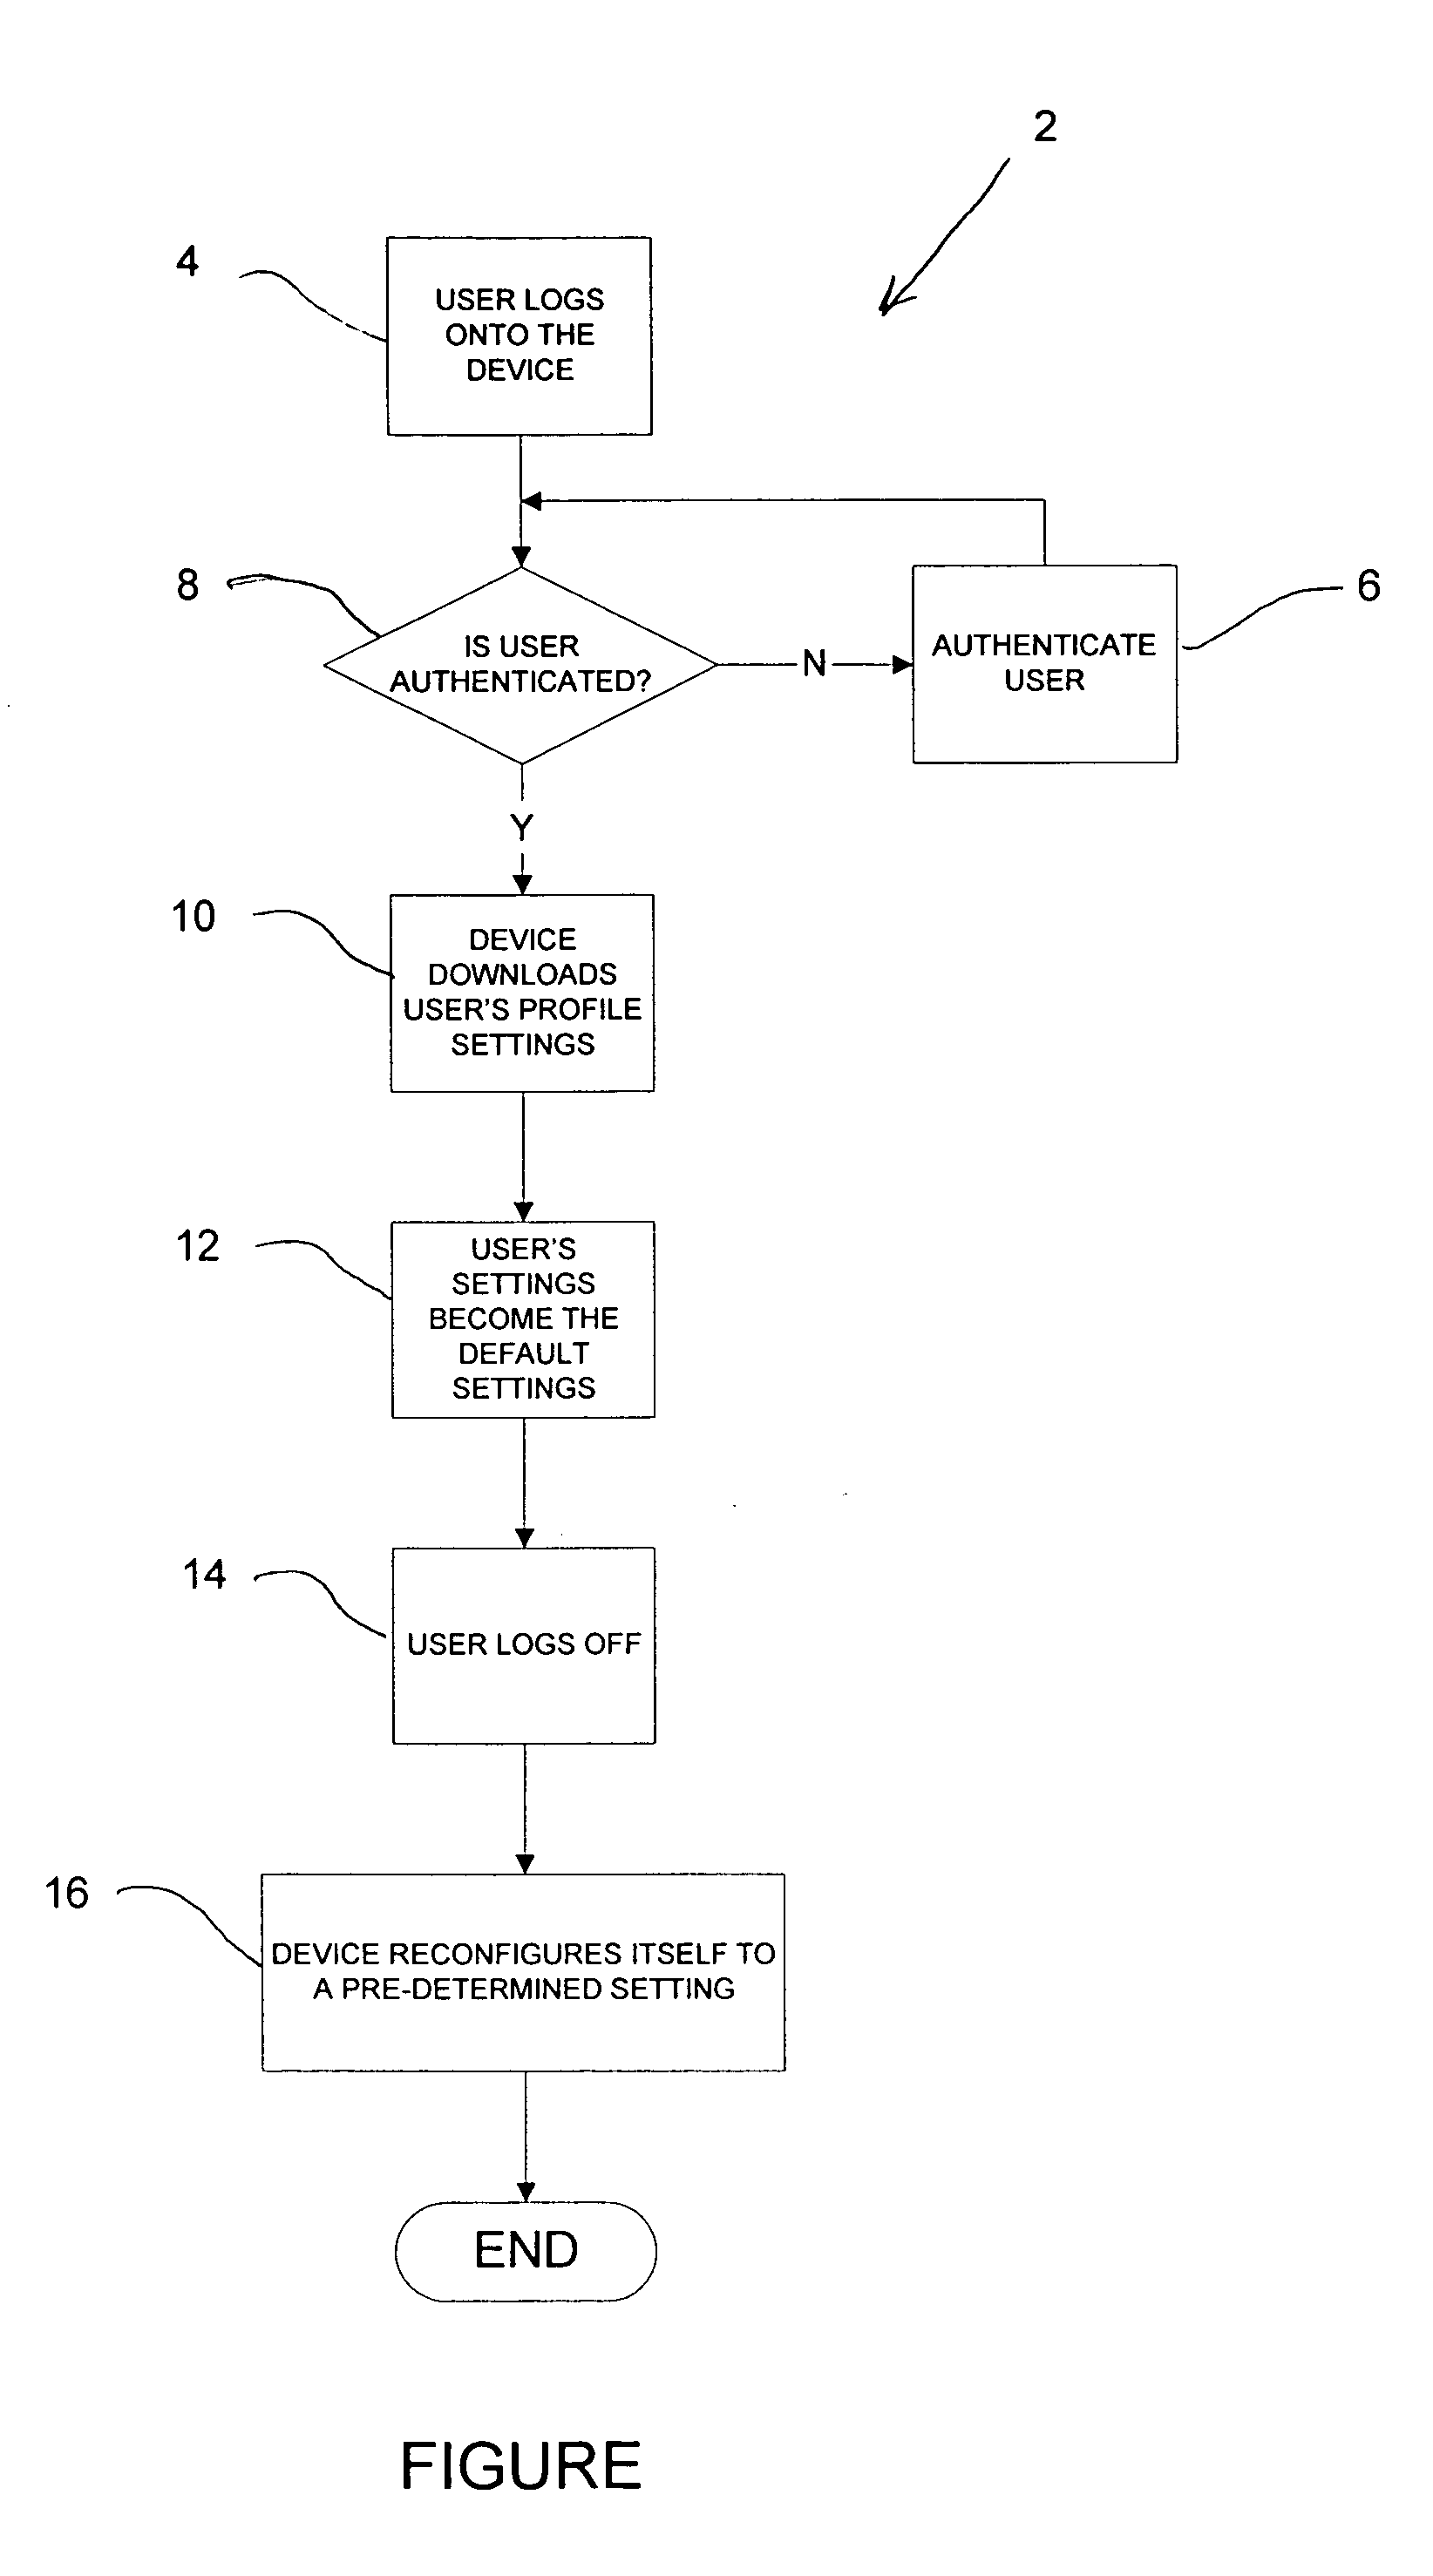 Multi-function product profile downloading after authentication